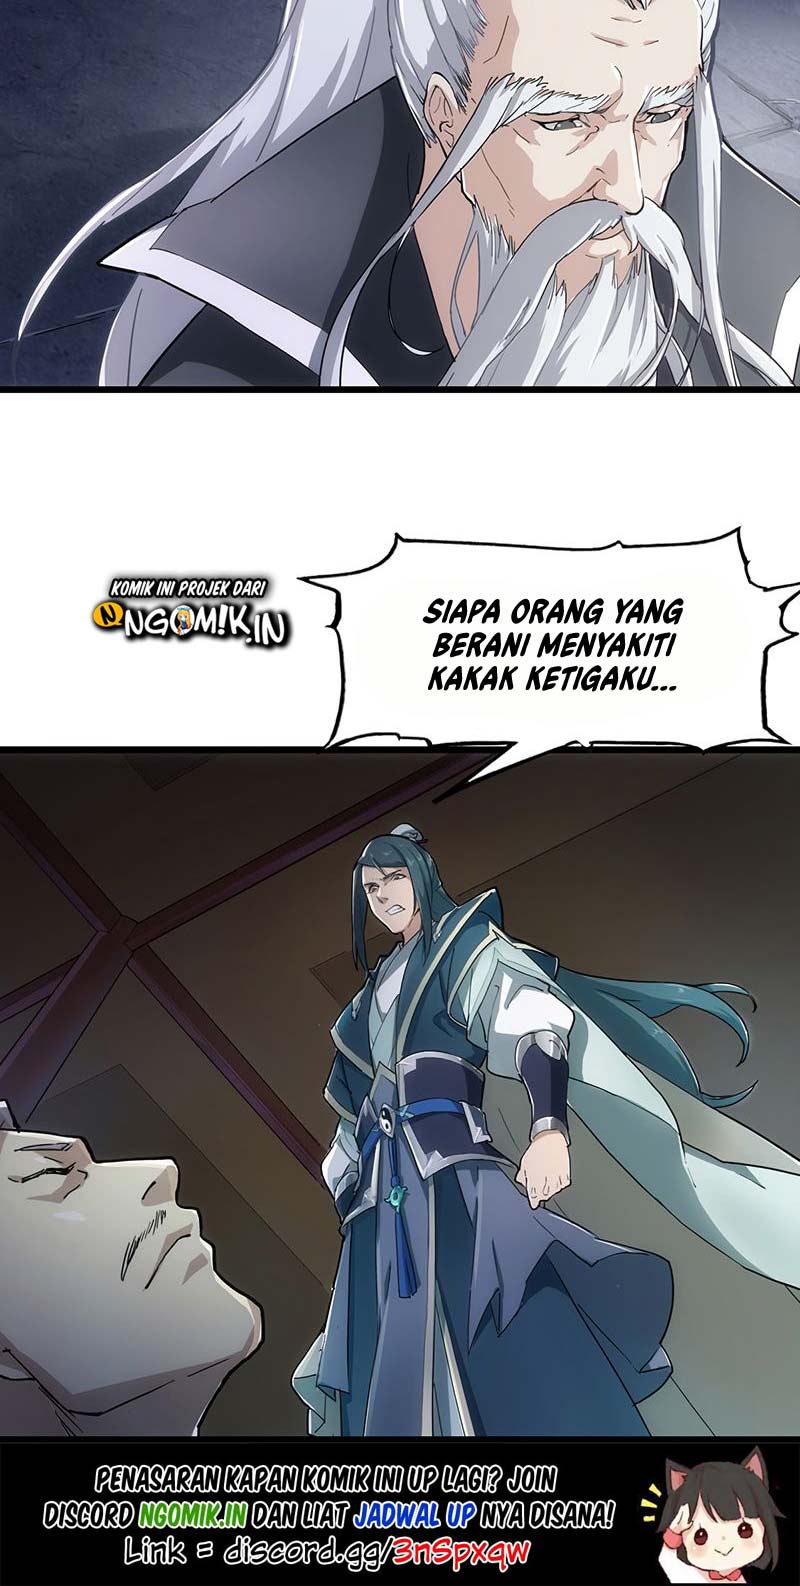 The Heaven Sword and the Dragon Sabre Chapter 03